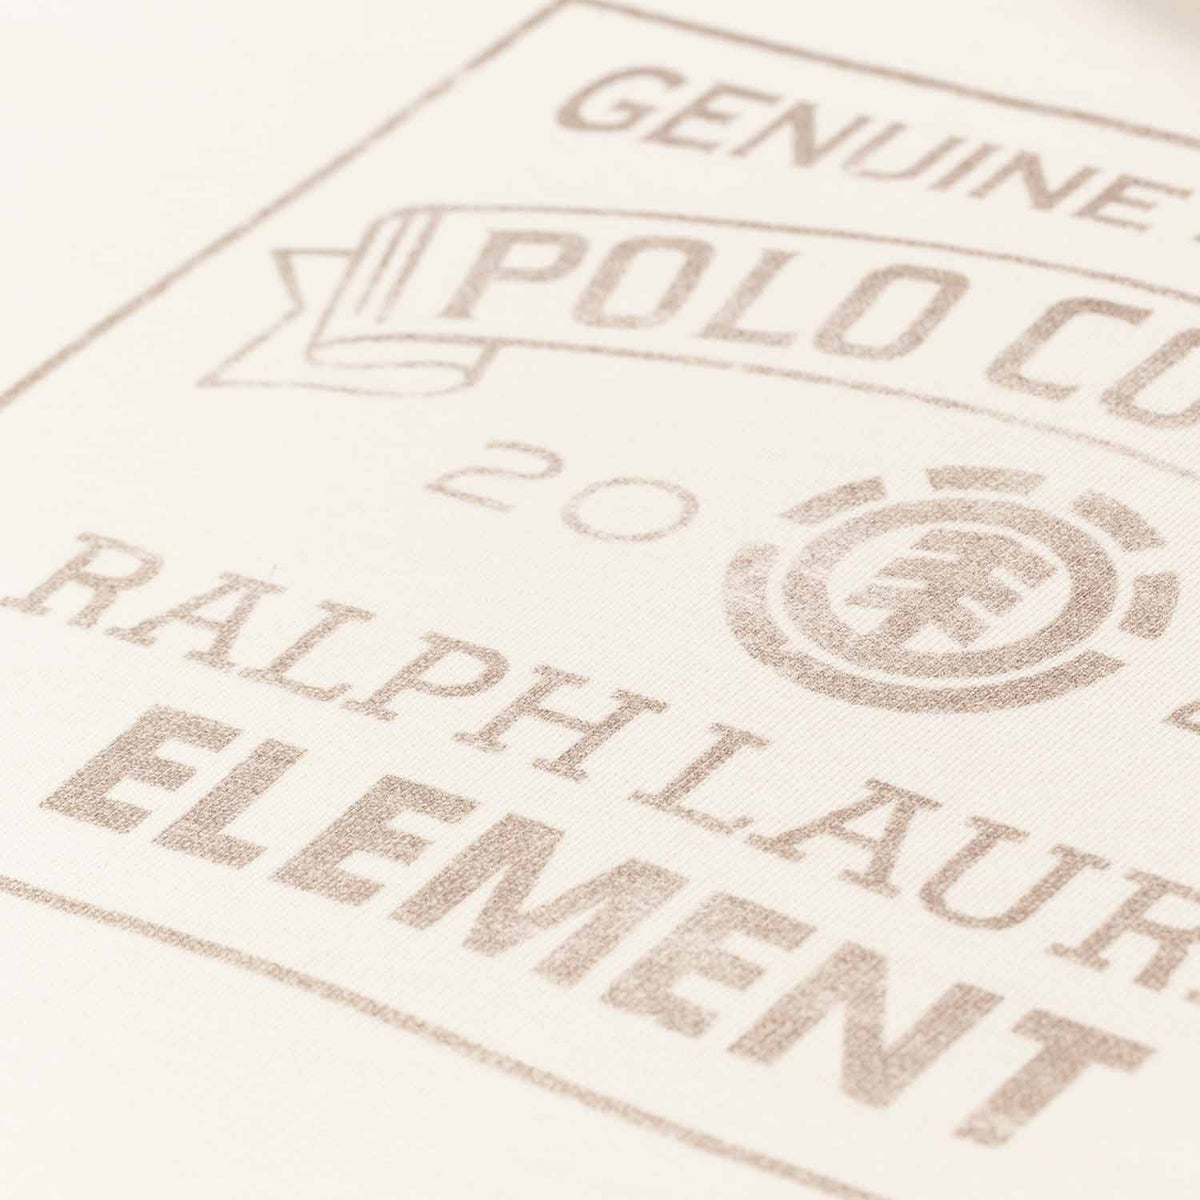 Back detail shot of Polo Ralph Lauren x Element Skateboards Hoodie in cream white color. Faded looking Element and Polo Ralph Lauren logo in brown on back of hoodie.